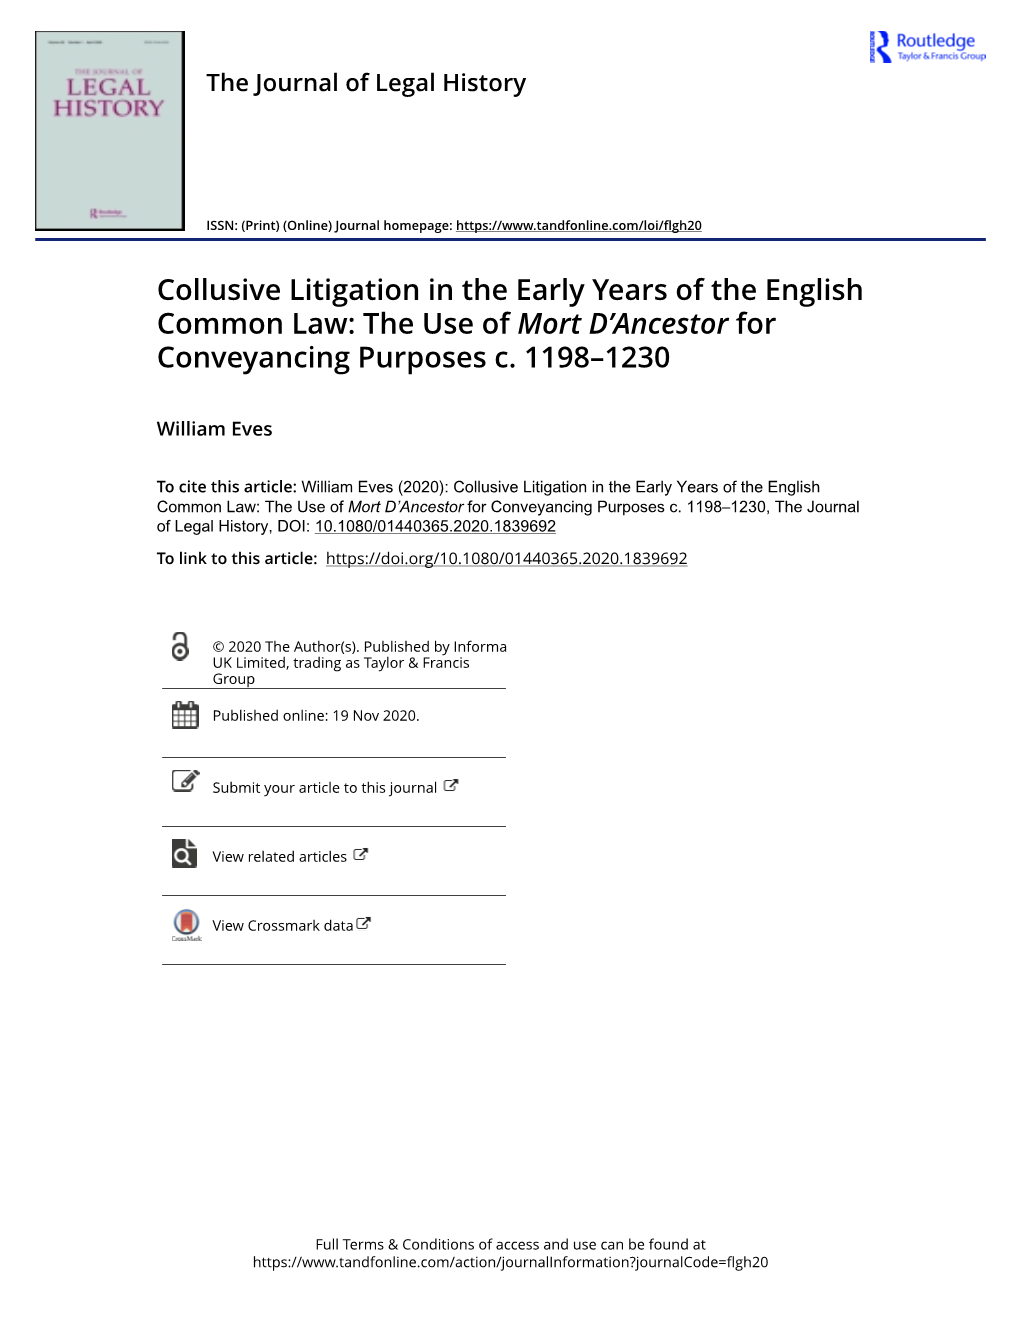 Collusive Litigation in the Early Years of the English Common Law: the Use of Mort D’Ancestor for Conveyancing Purposes C